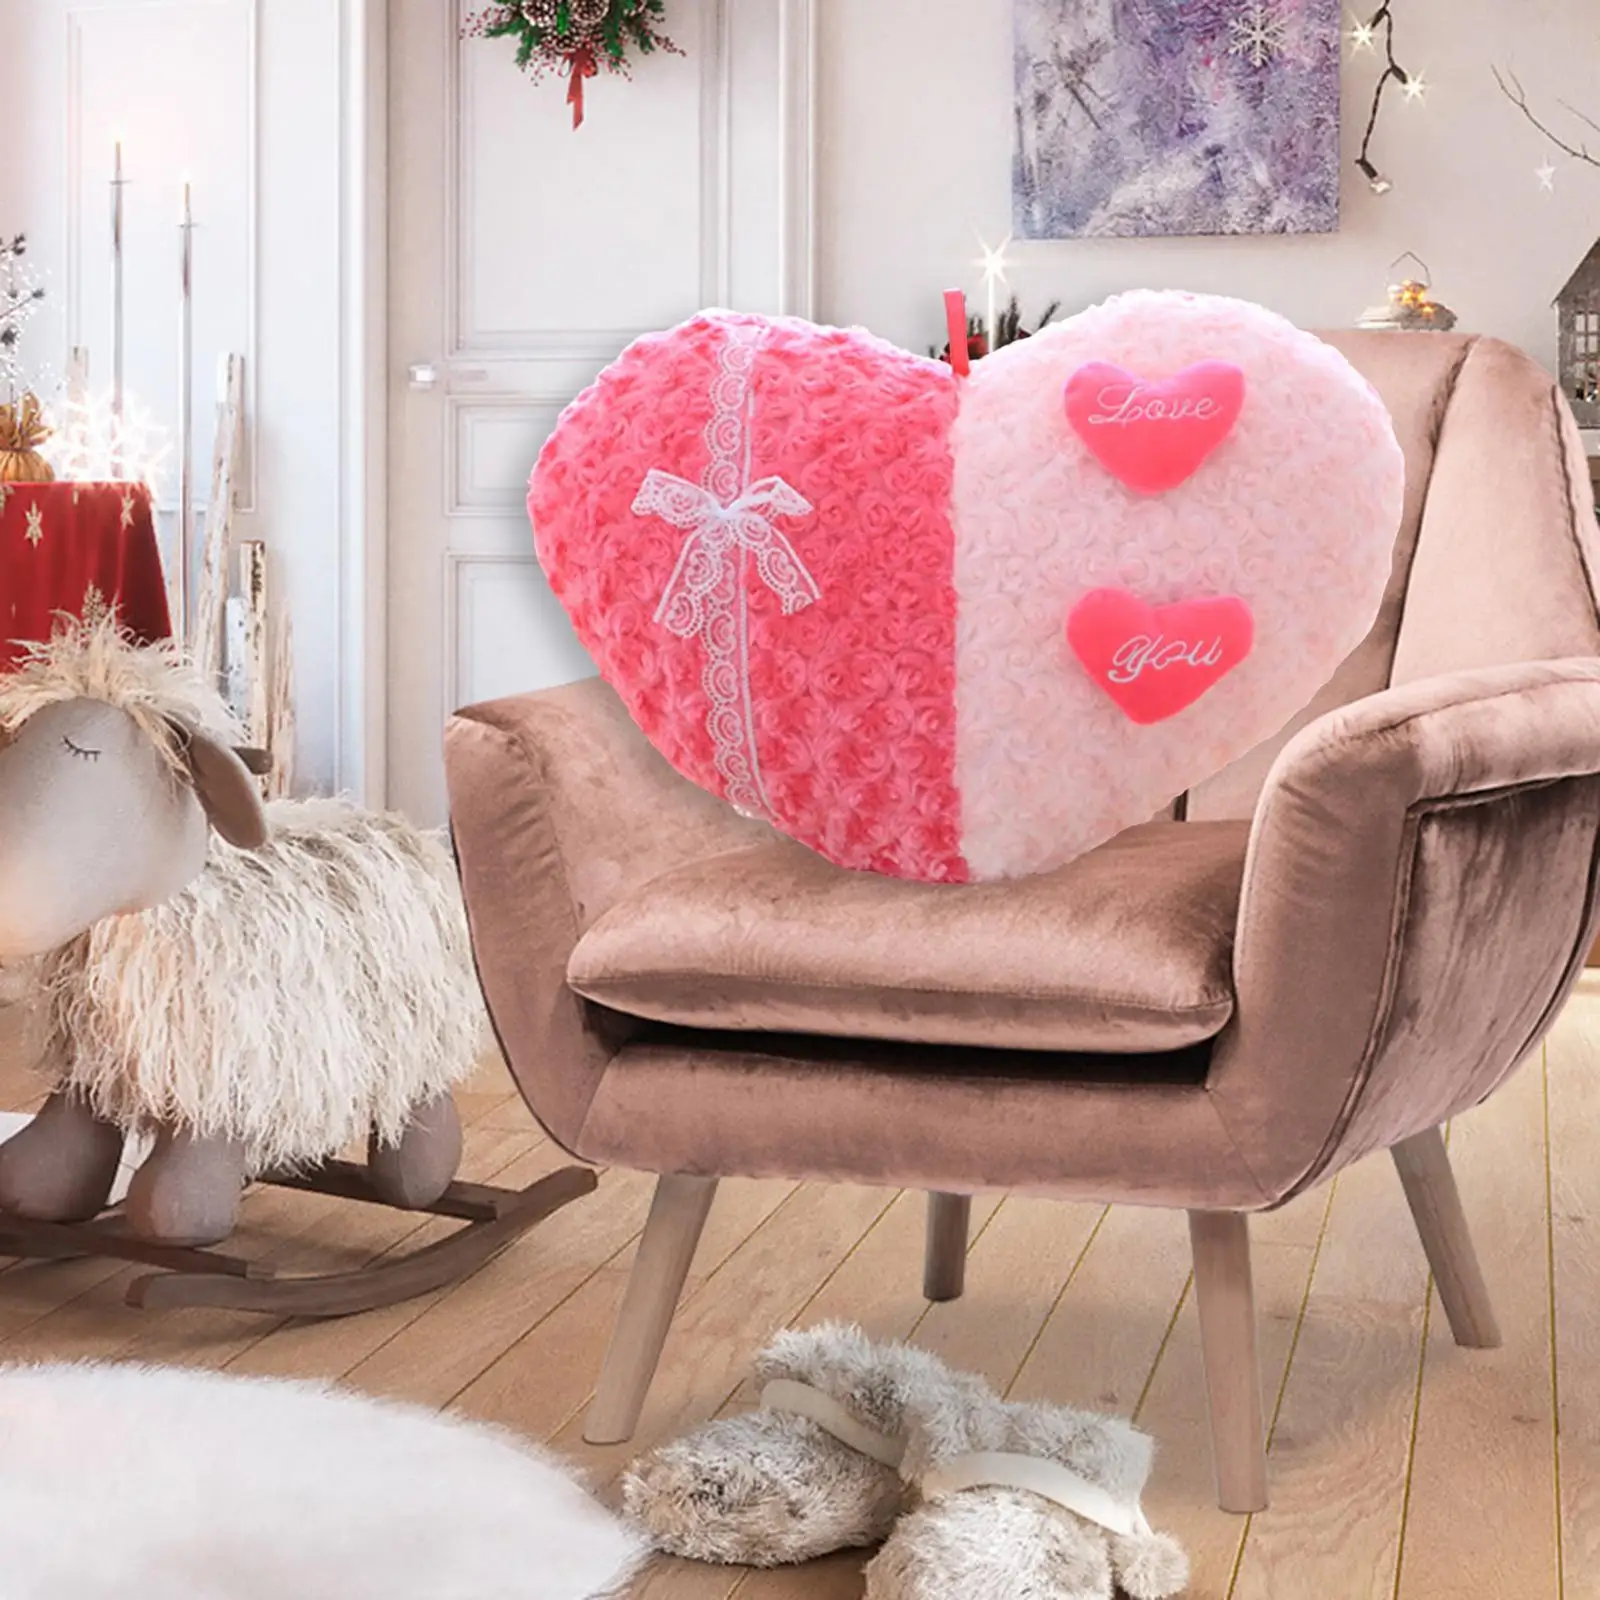 Cute Throw Pillow Heart Shaped Cushions Throw Home Decoration Housewarming Gift Pink for Living Room kids Room Couch